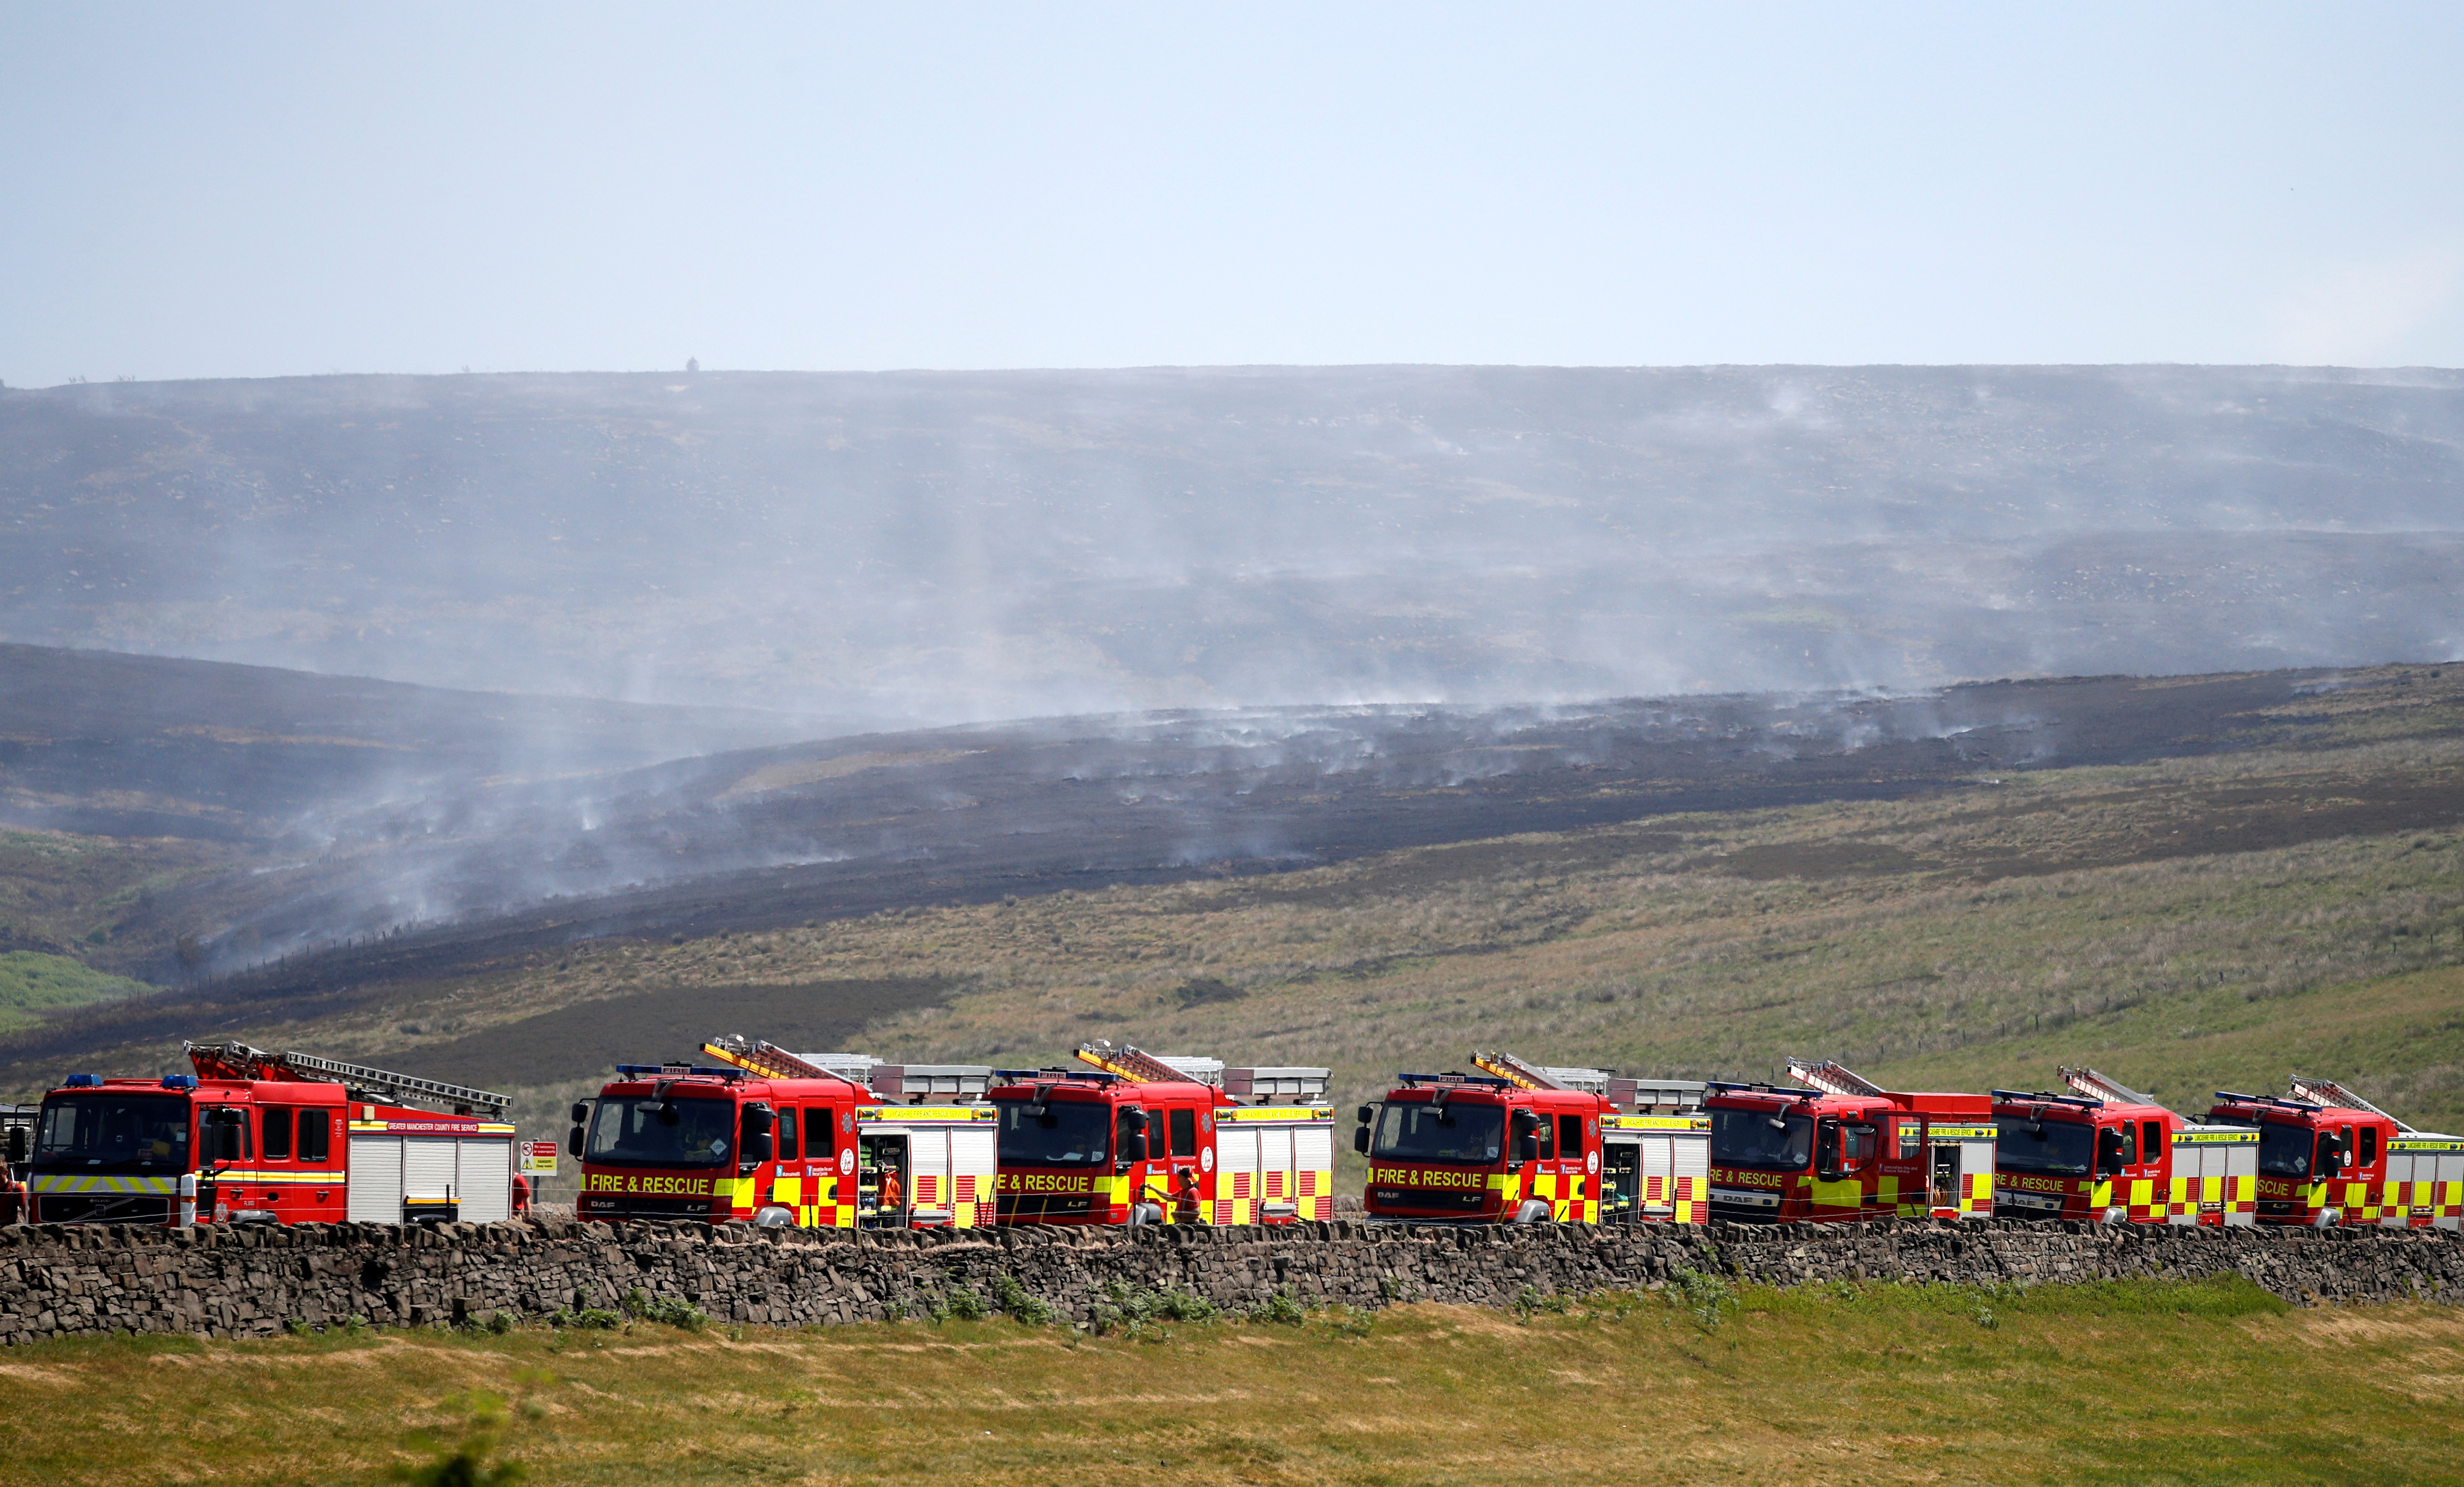 Fire engines park up on the moor as firefighters continue tackling a blaze on Saddleworth Moor